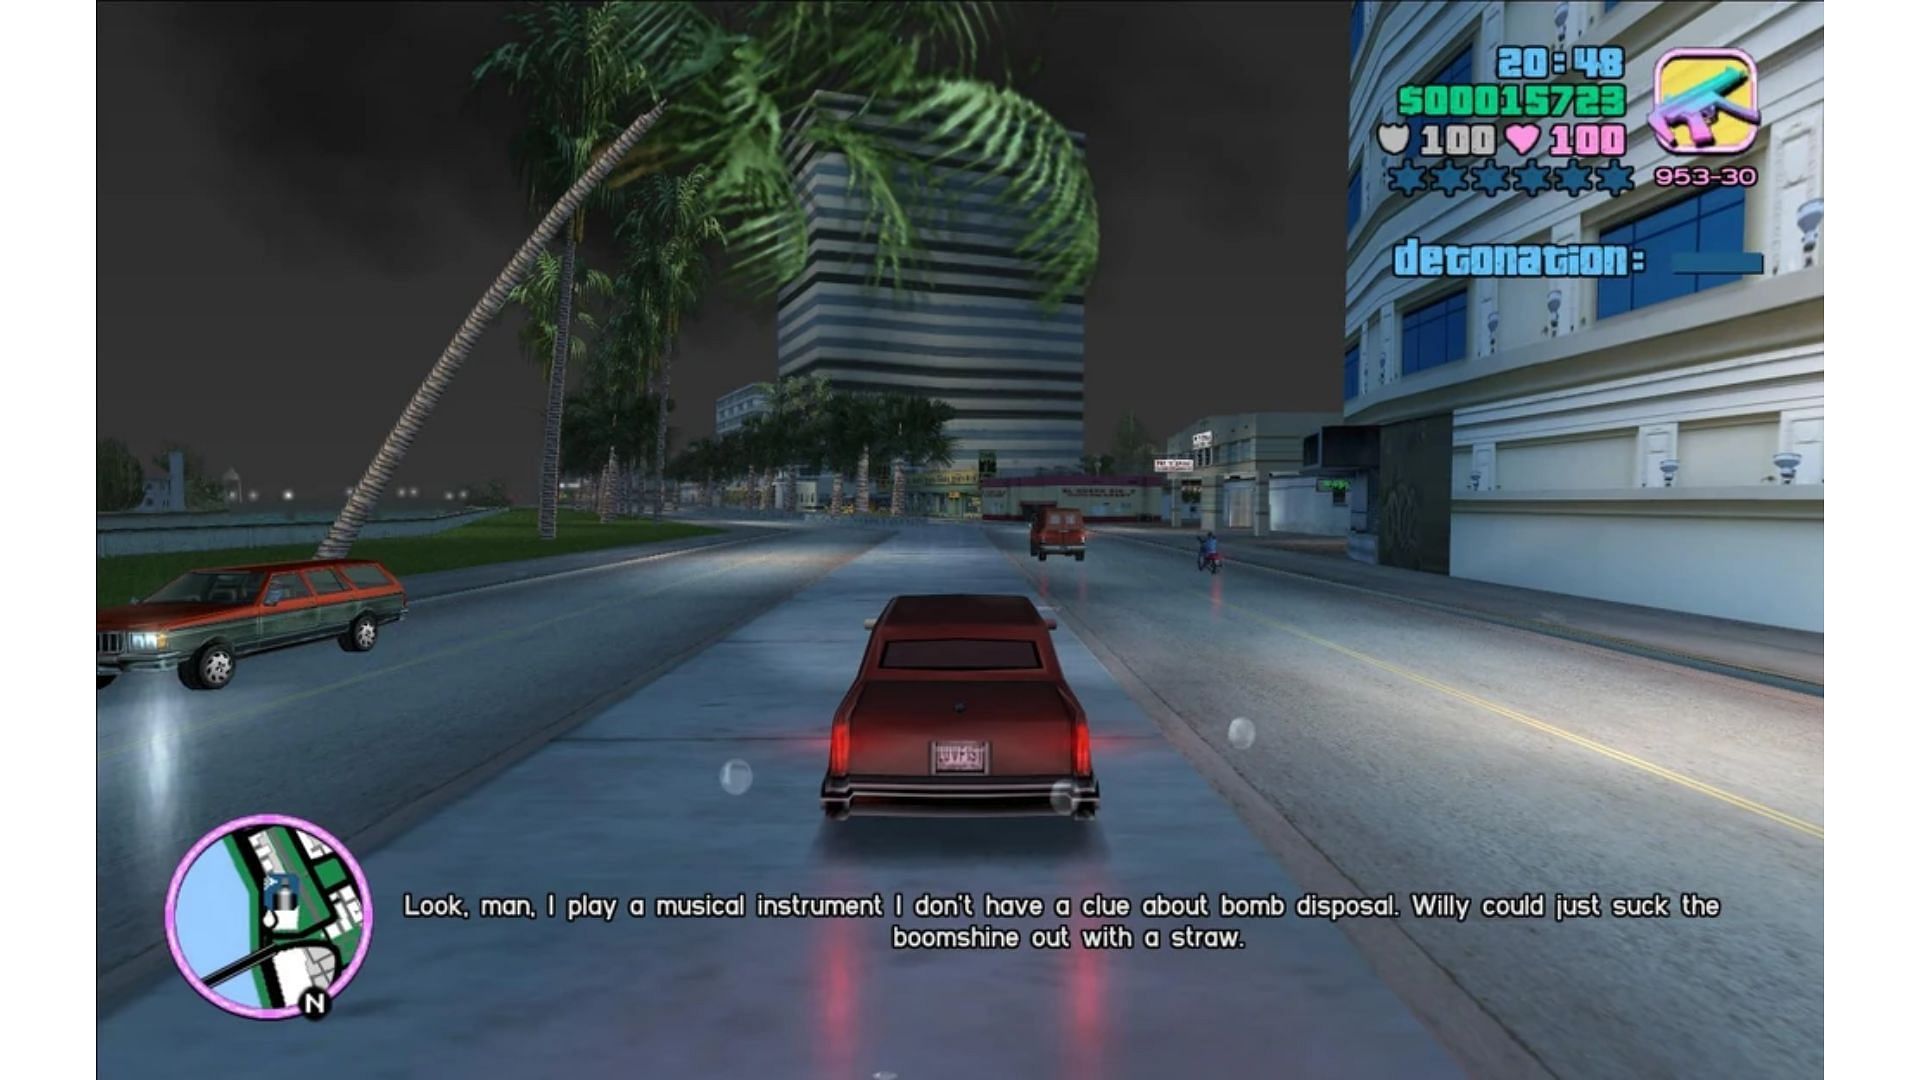 A screenshot from the Publicity Tour mission in Vice City (Image via GTA Wiki)